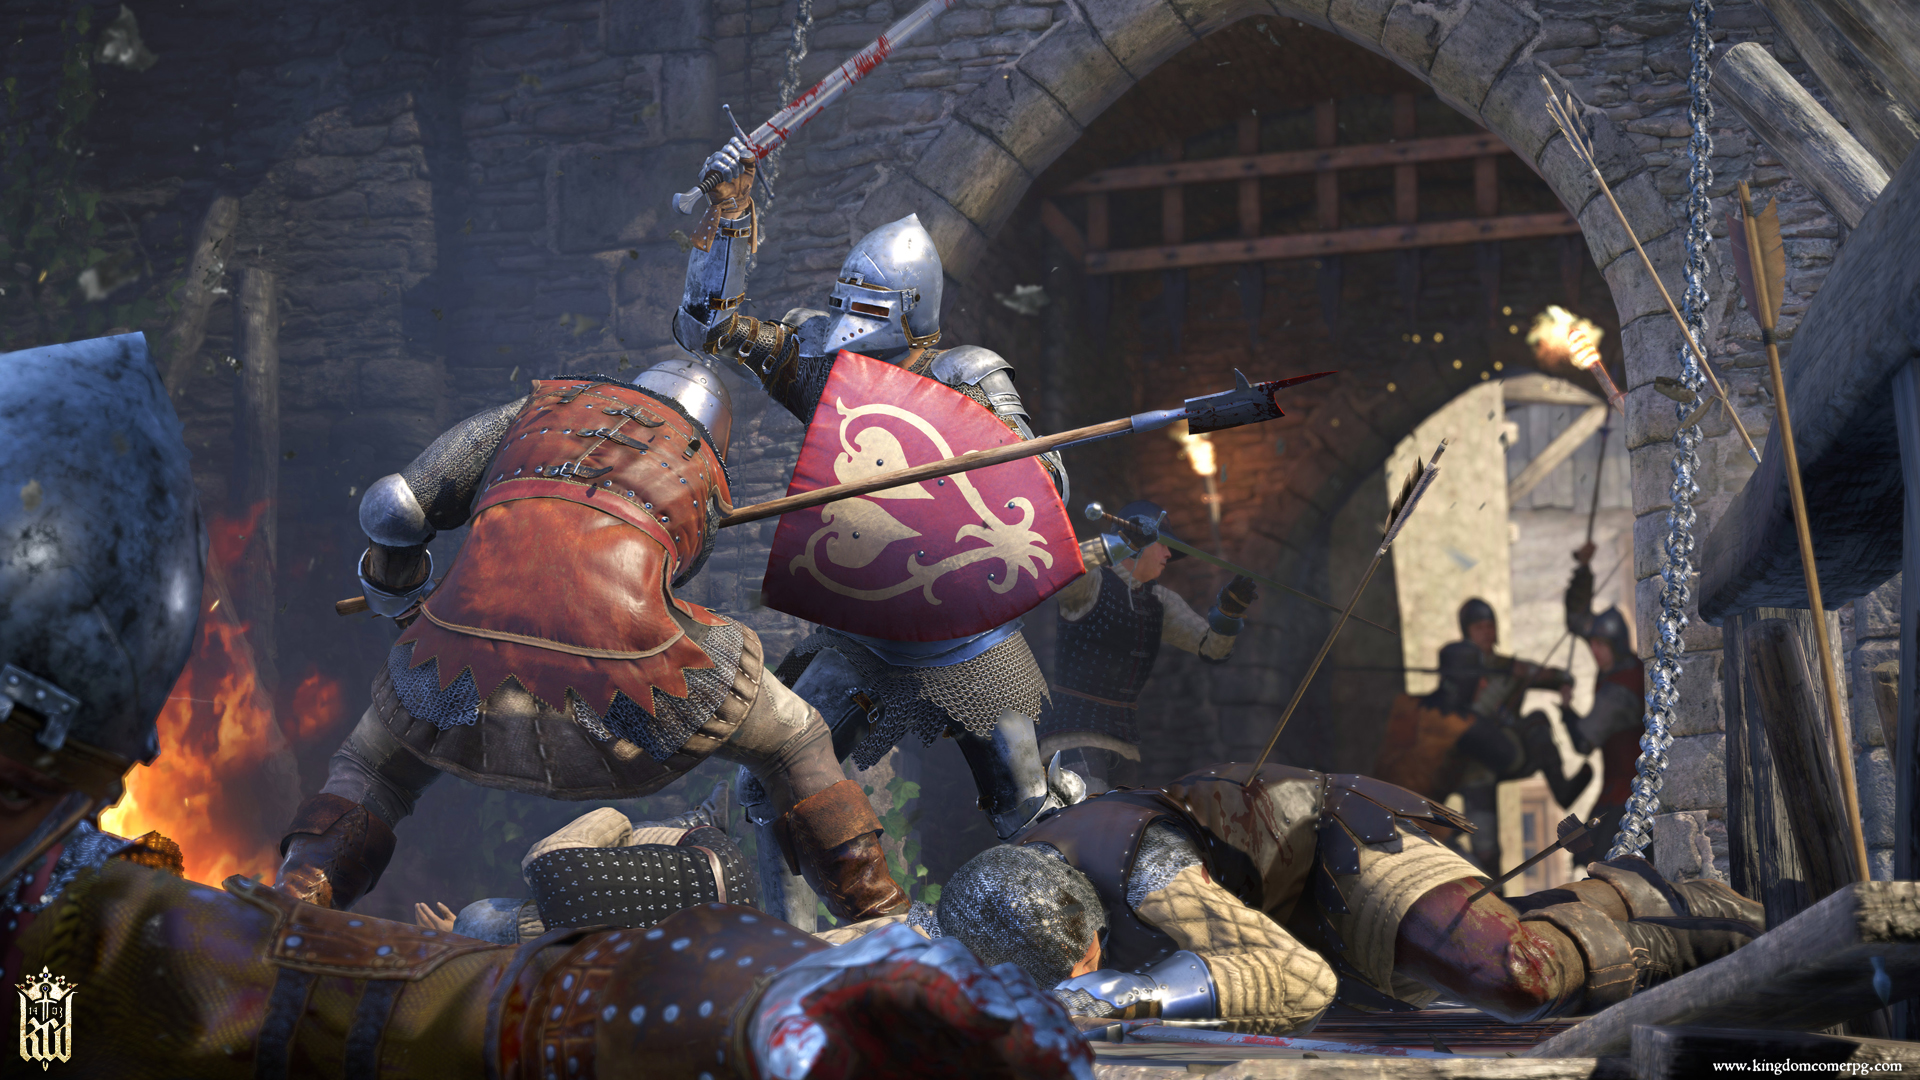 Kingdom Come: Deliverance is now available on Xbox One ... - 1920 x 1080 jpeg 1326kB